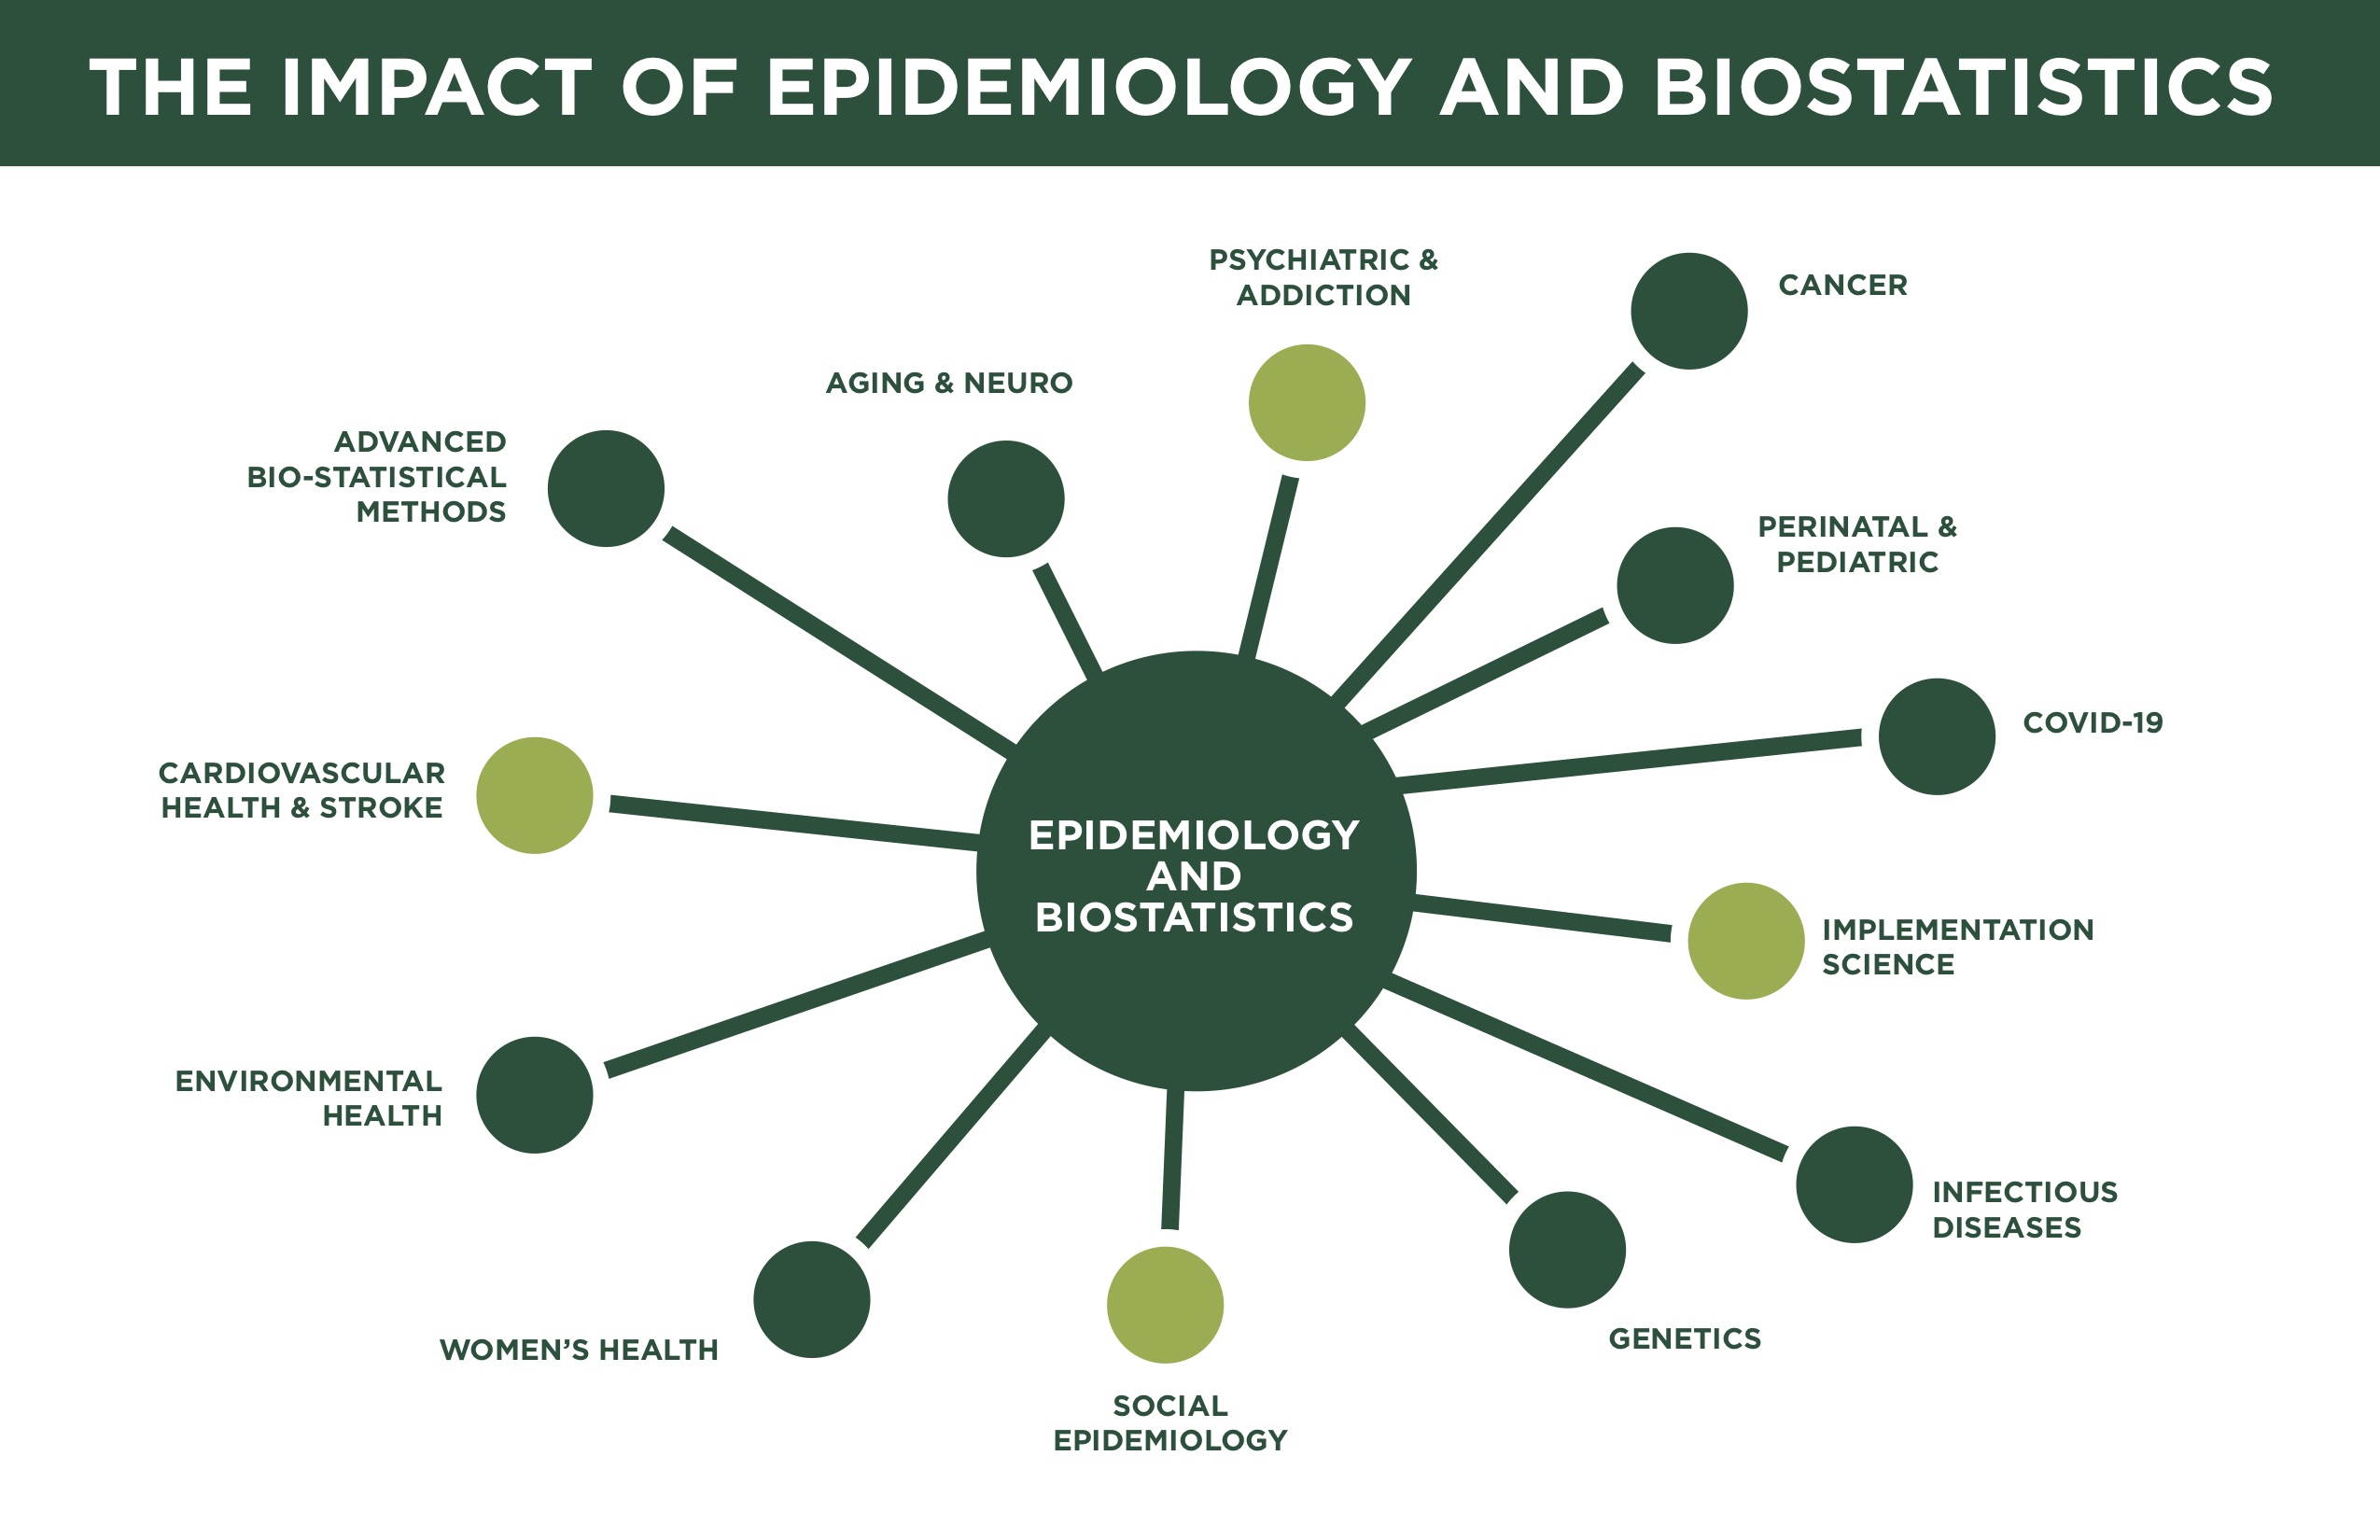 The impace of Public Health on Epidemiology and Biostatistics